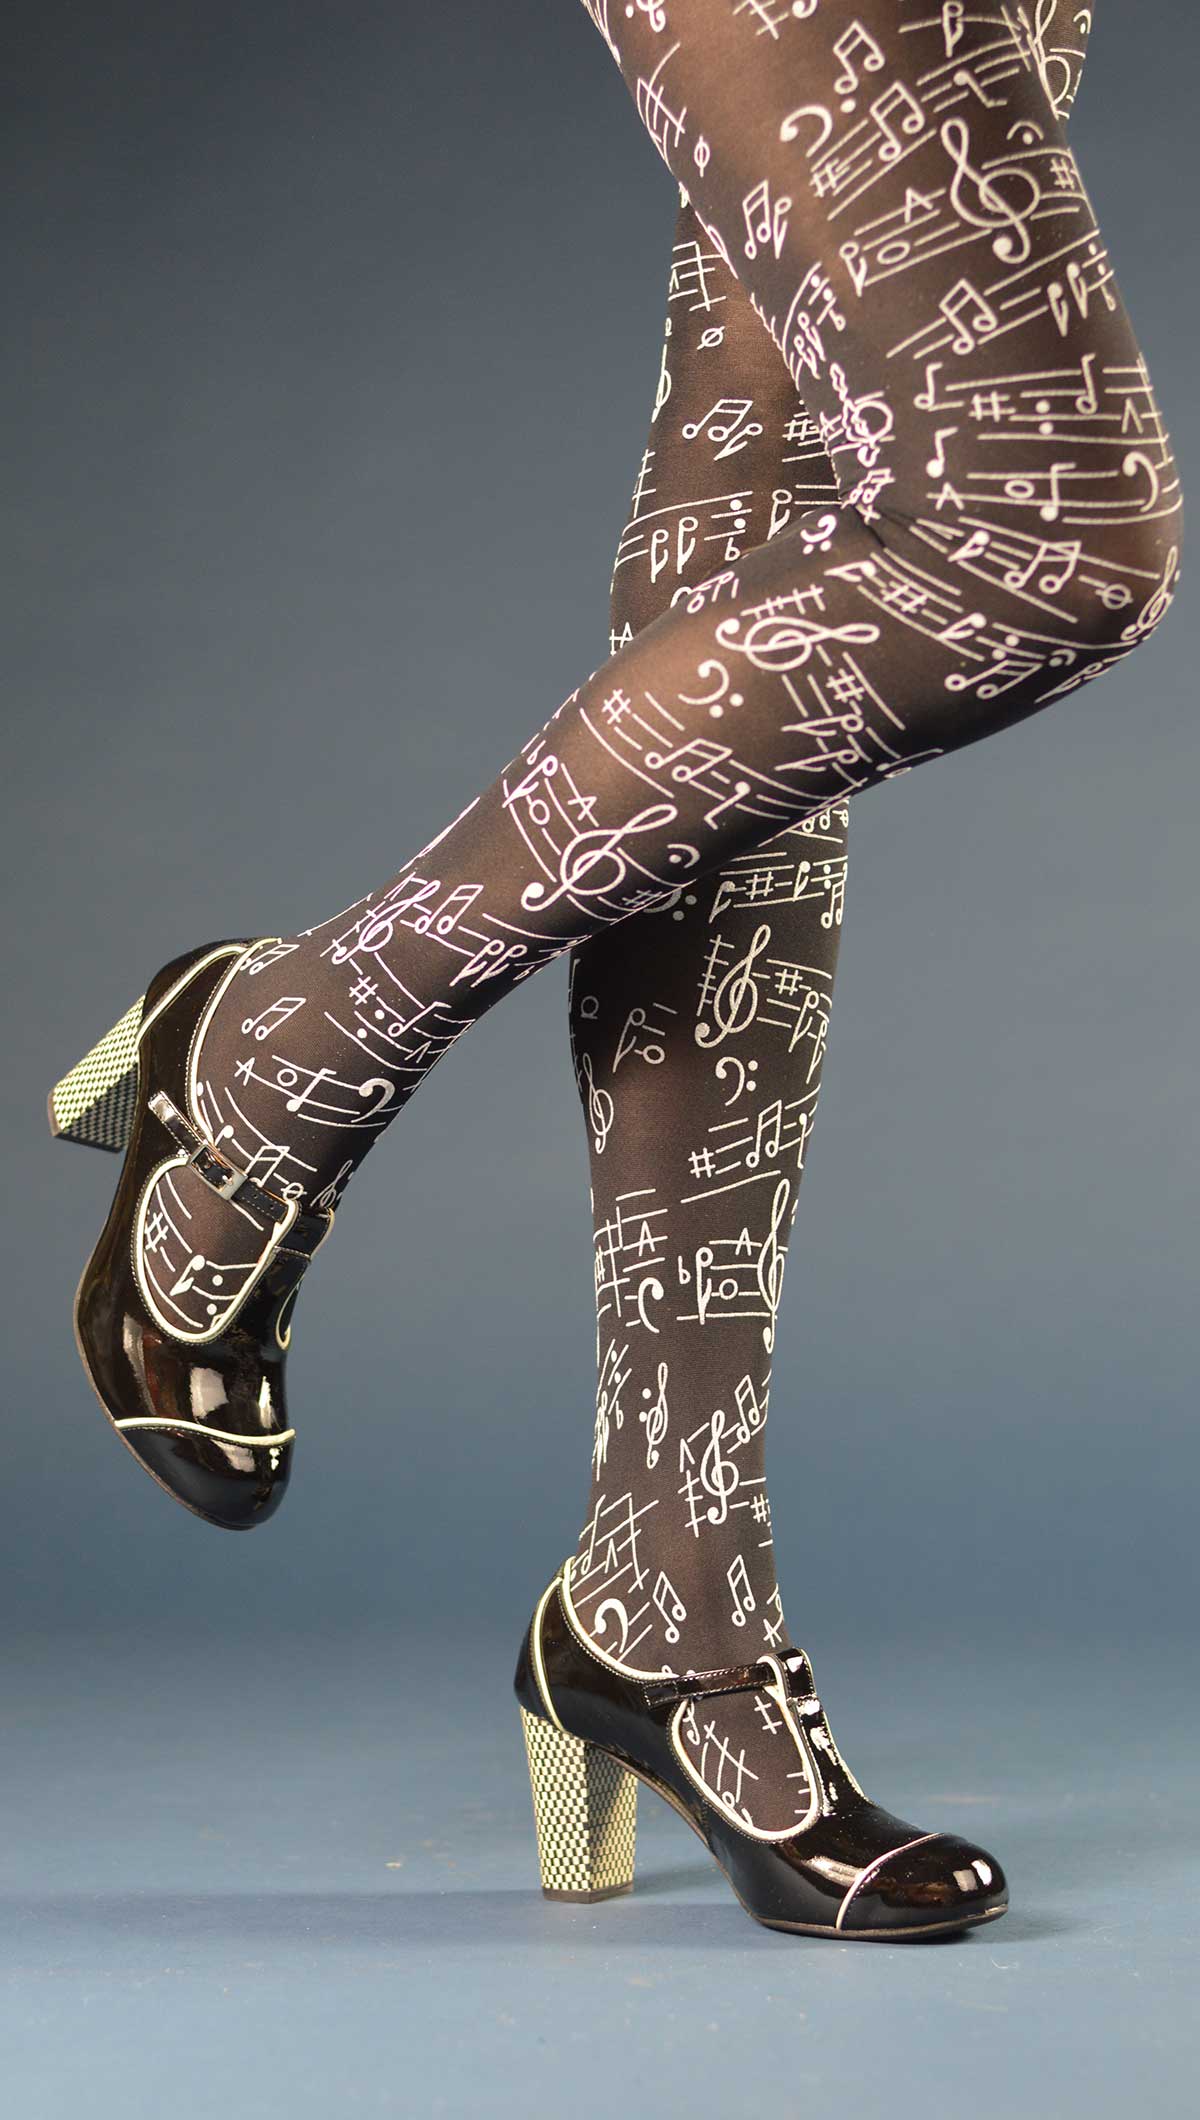 Flocked Musical Notes Tights- Women's vintage retro 60's – 70's